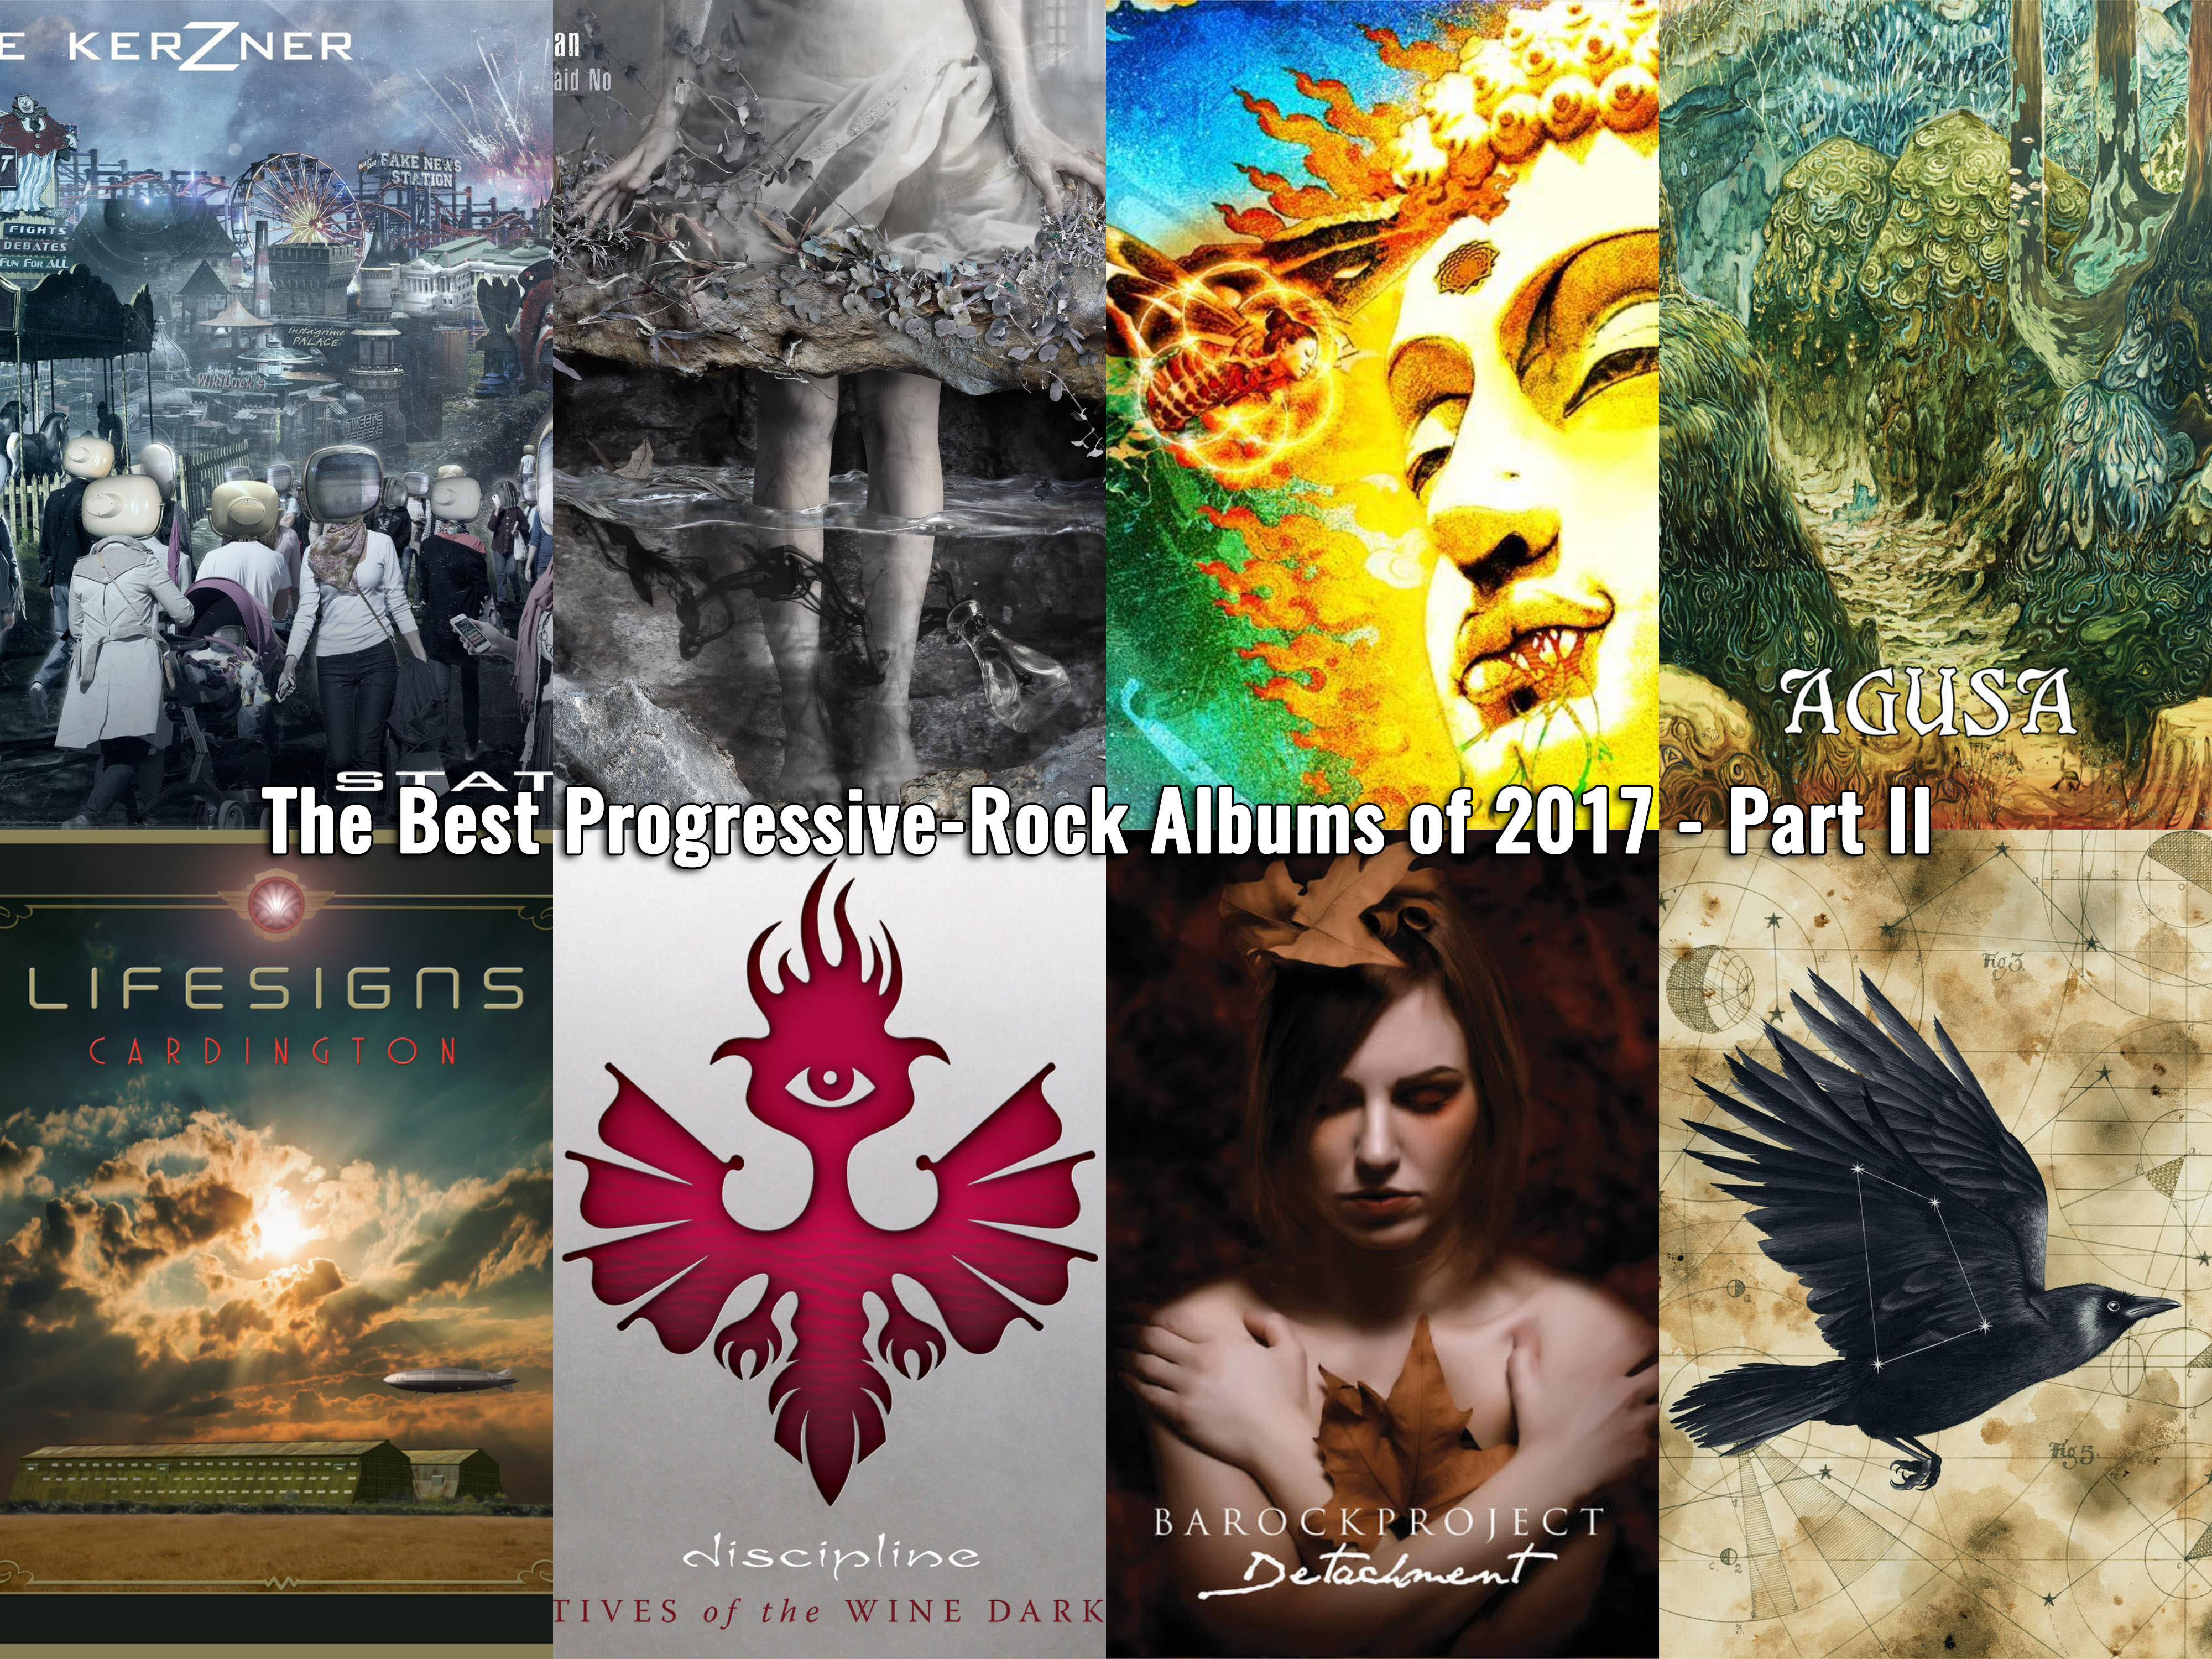 A Year In Review: The Best Progressive-Rock Albums of 2017 (Part II)